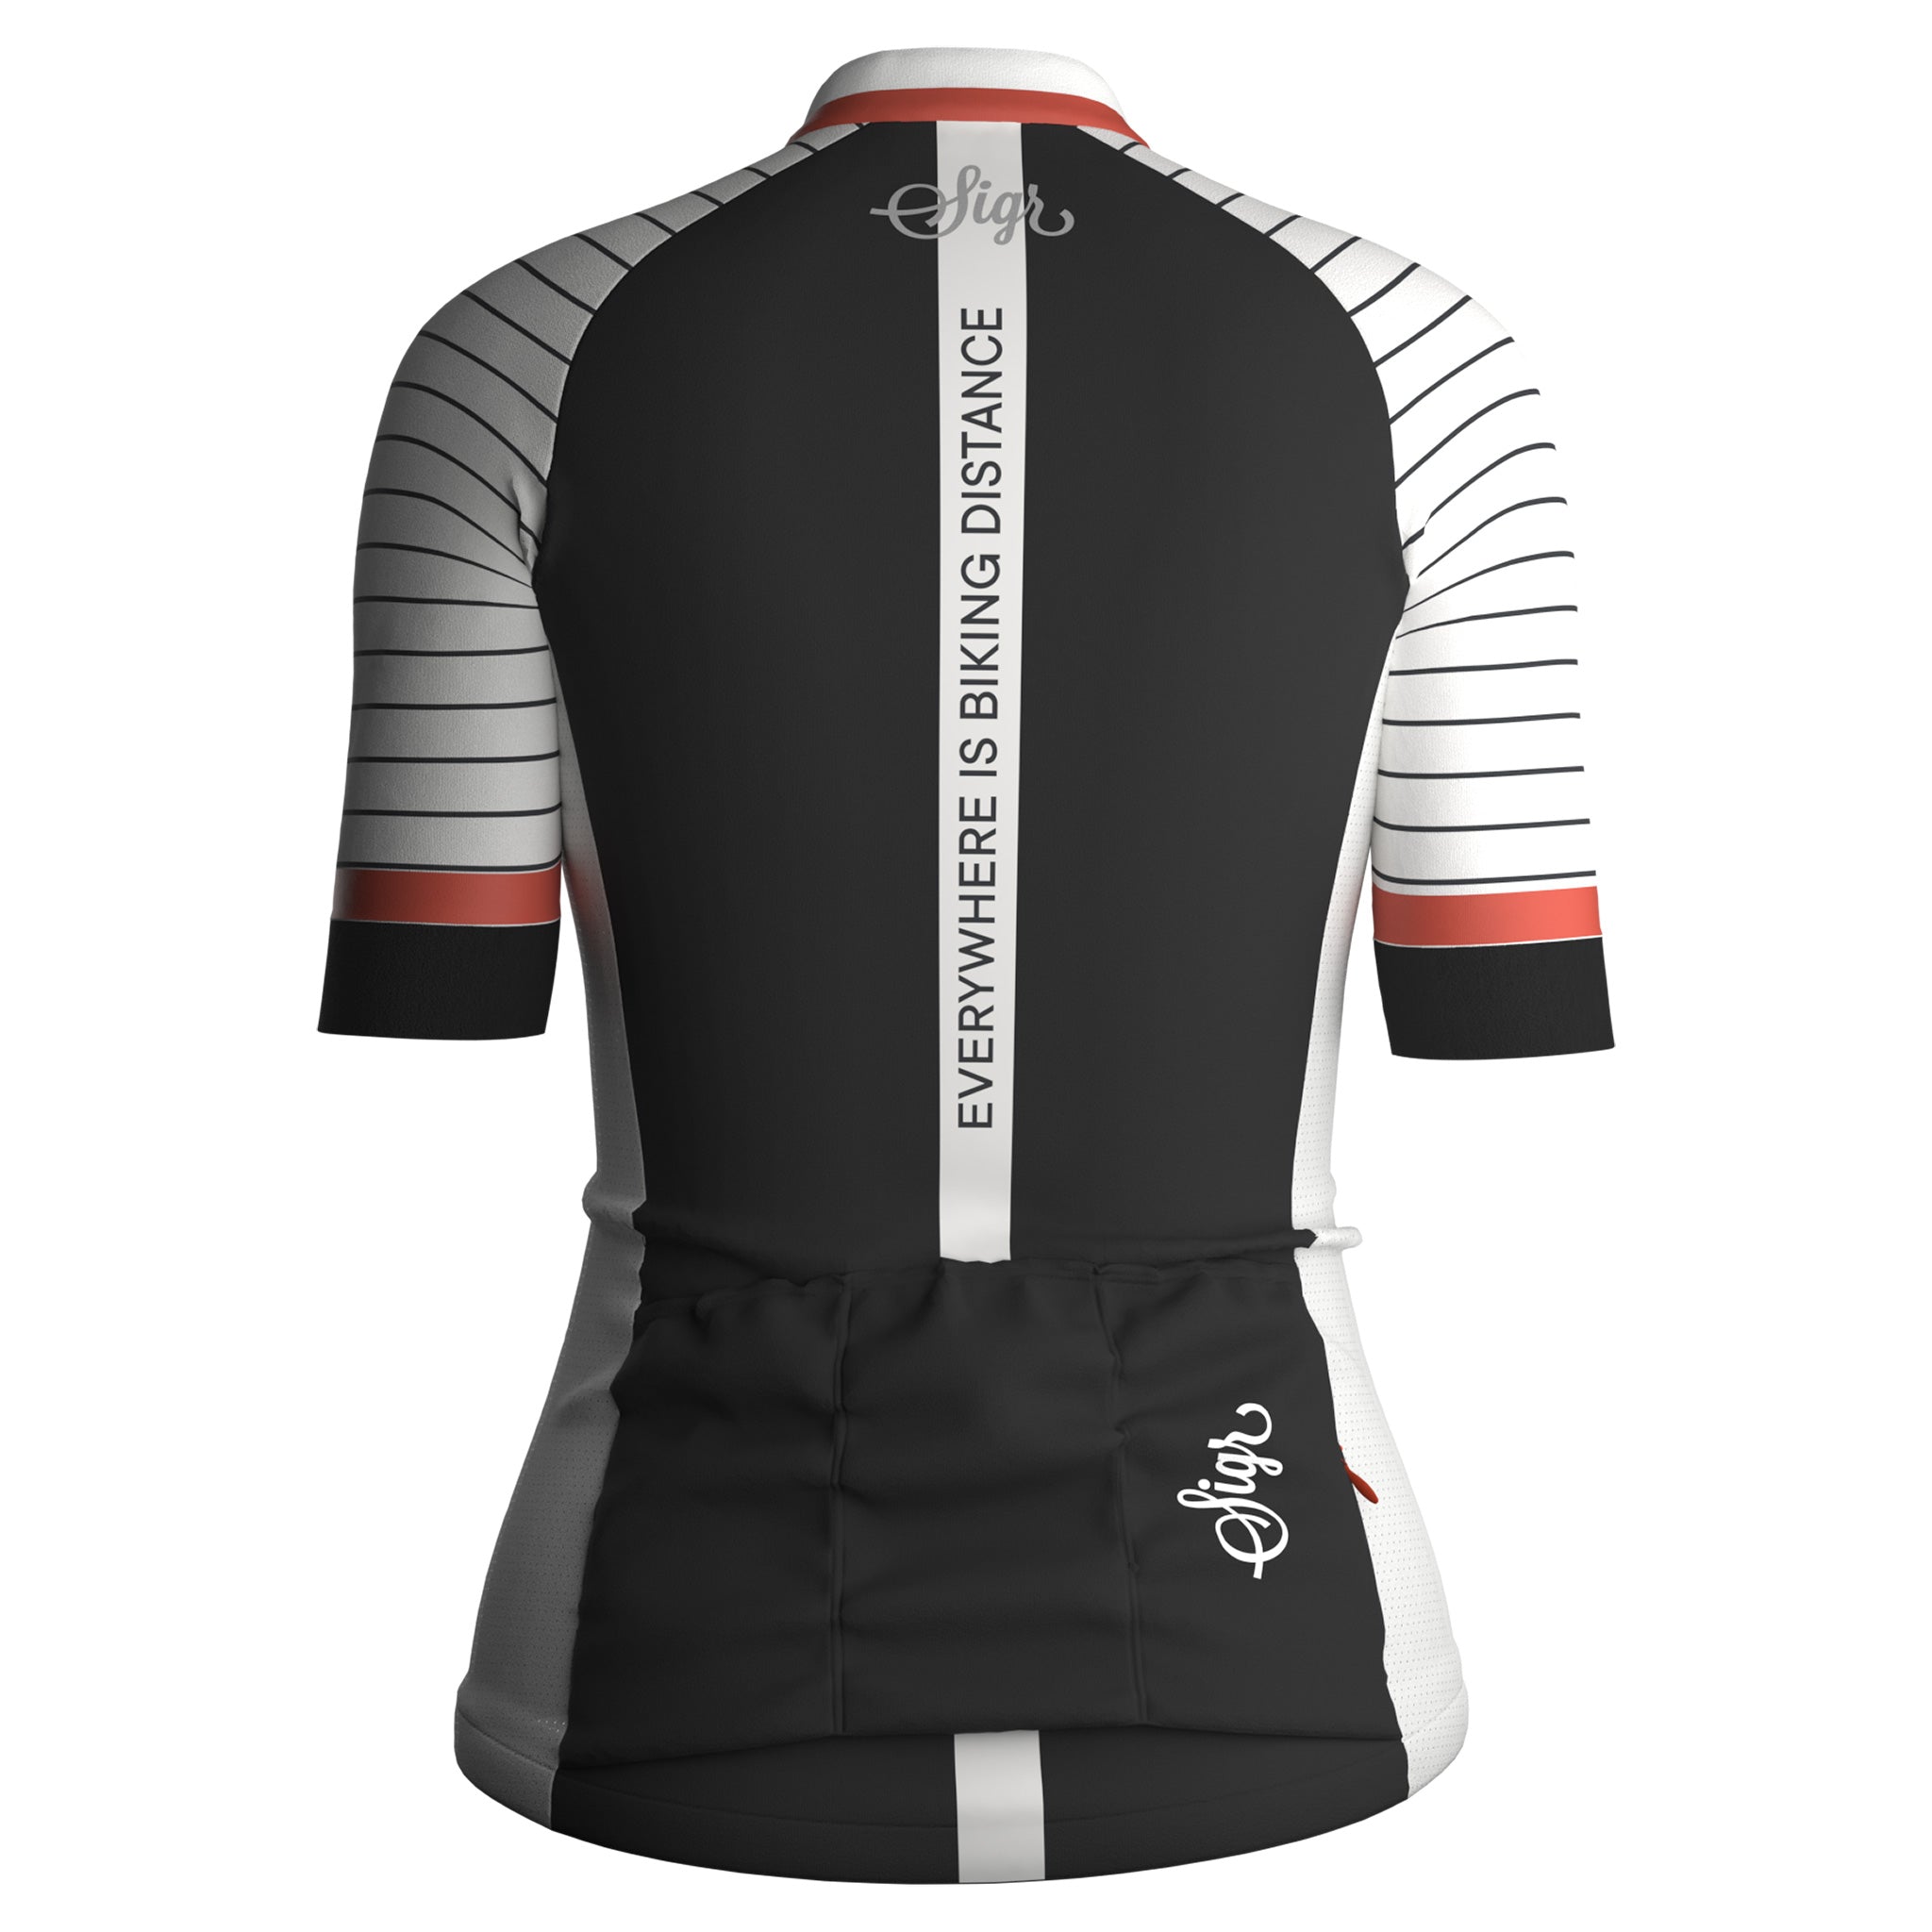 White Horizon with Back Slogan - Road Cycling Jersey for Women